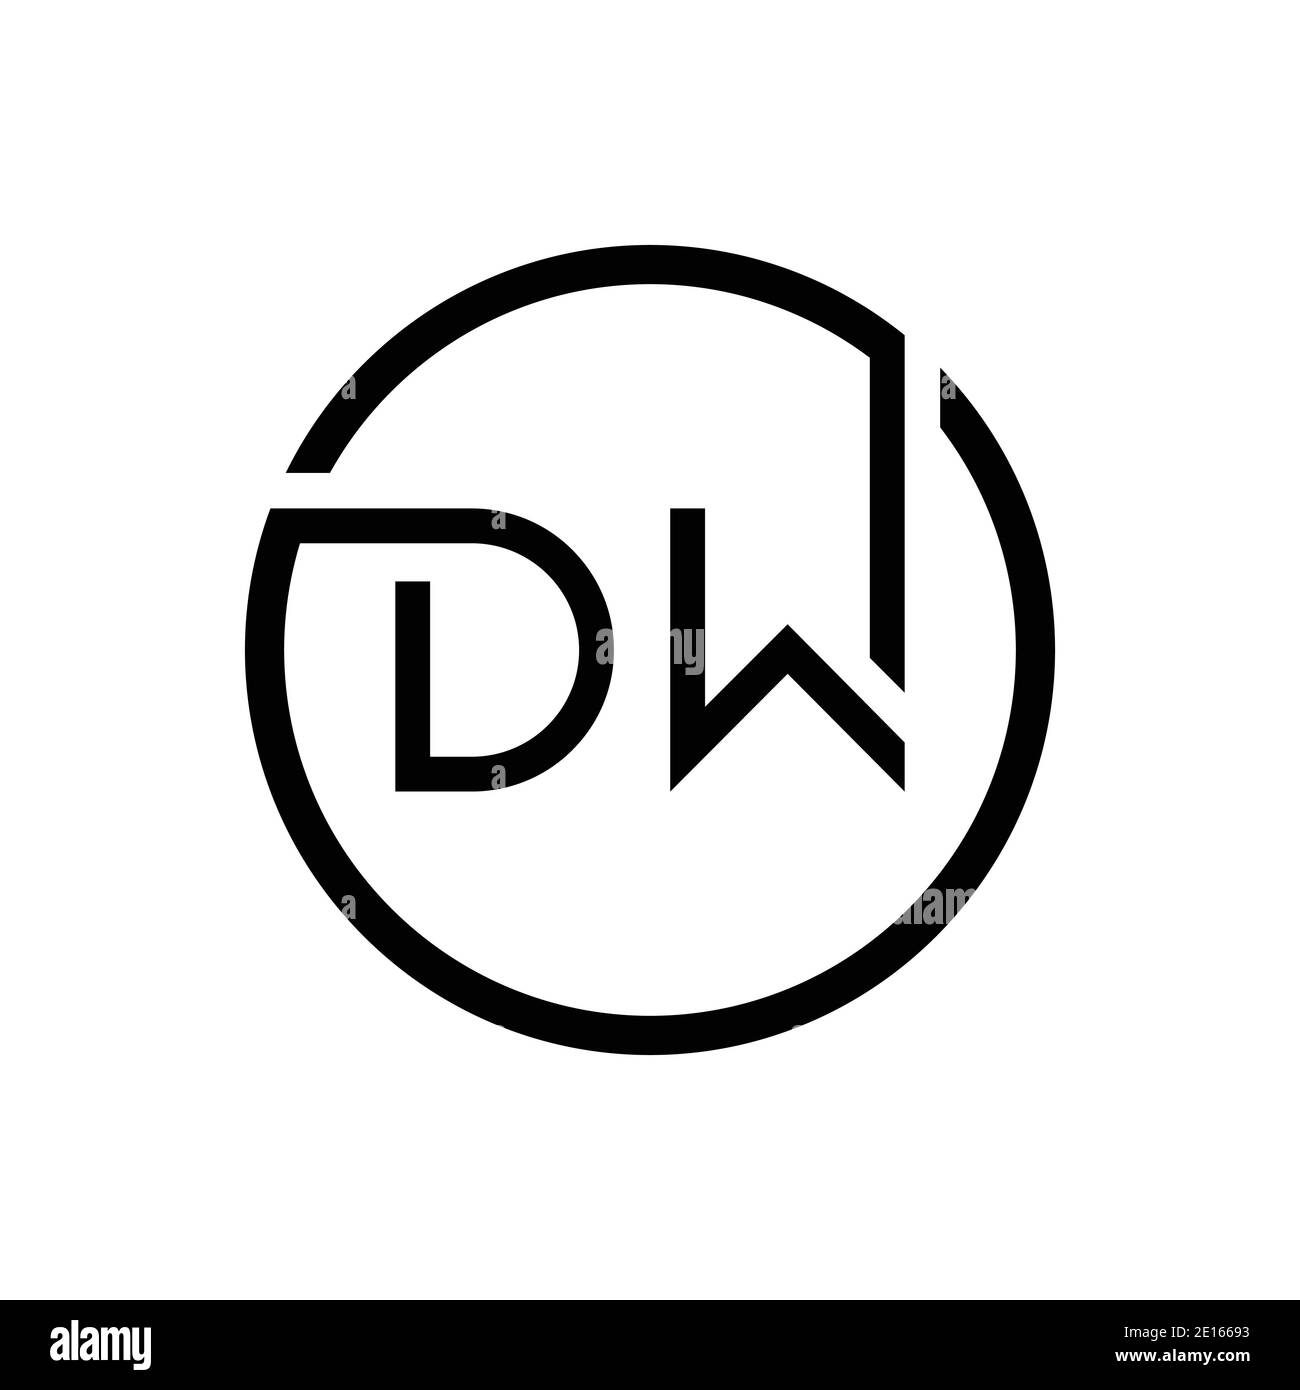 Initial DW Letter Logo Creative Typography Vector Template. Creative Circle Letter DW Logo Design Stock Vector